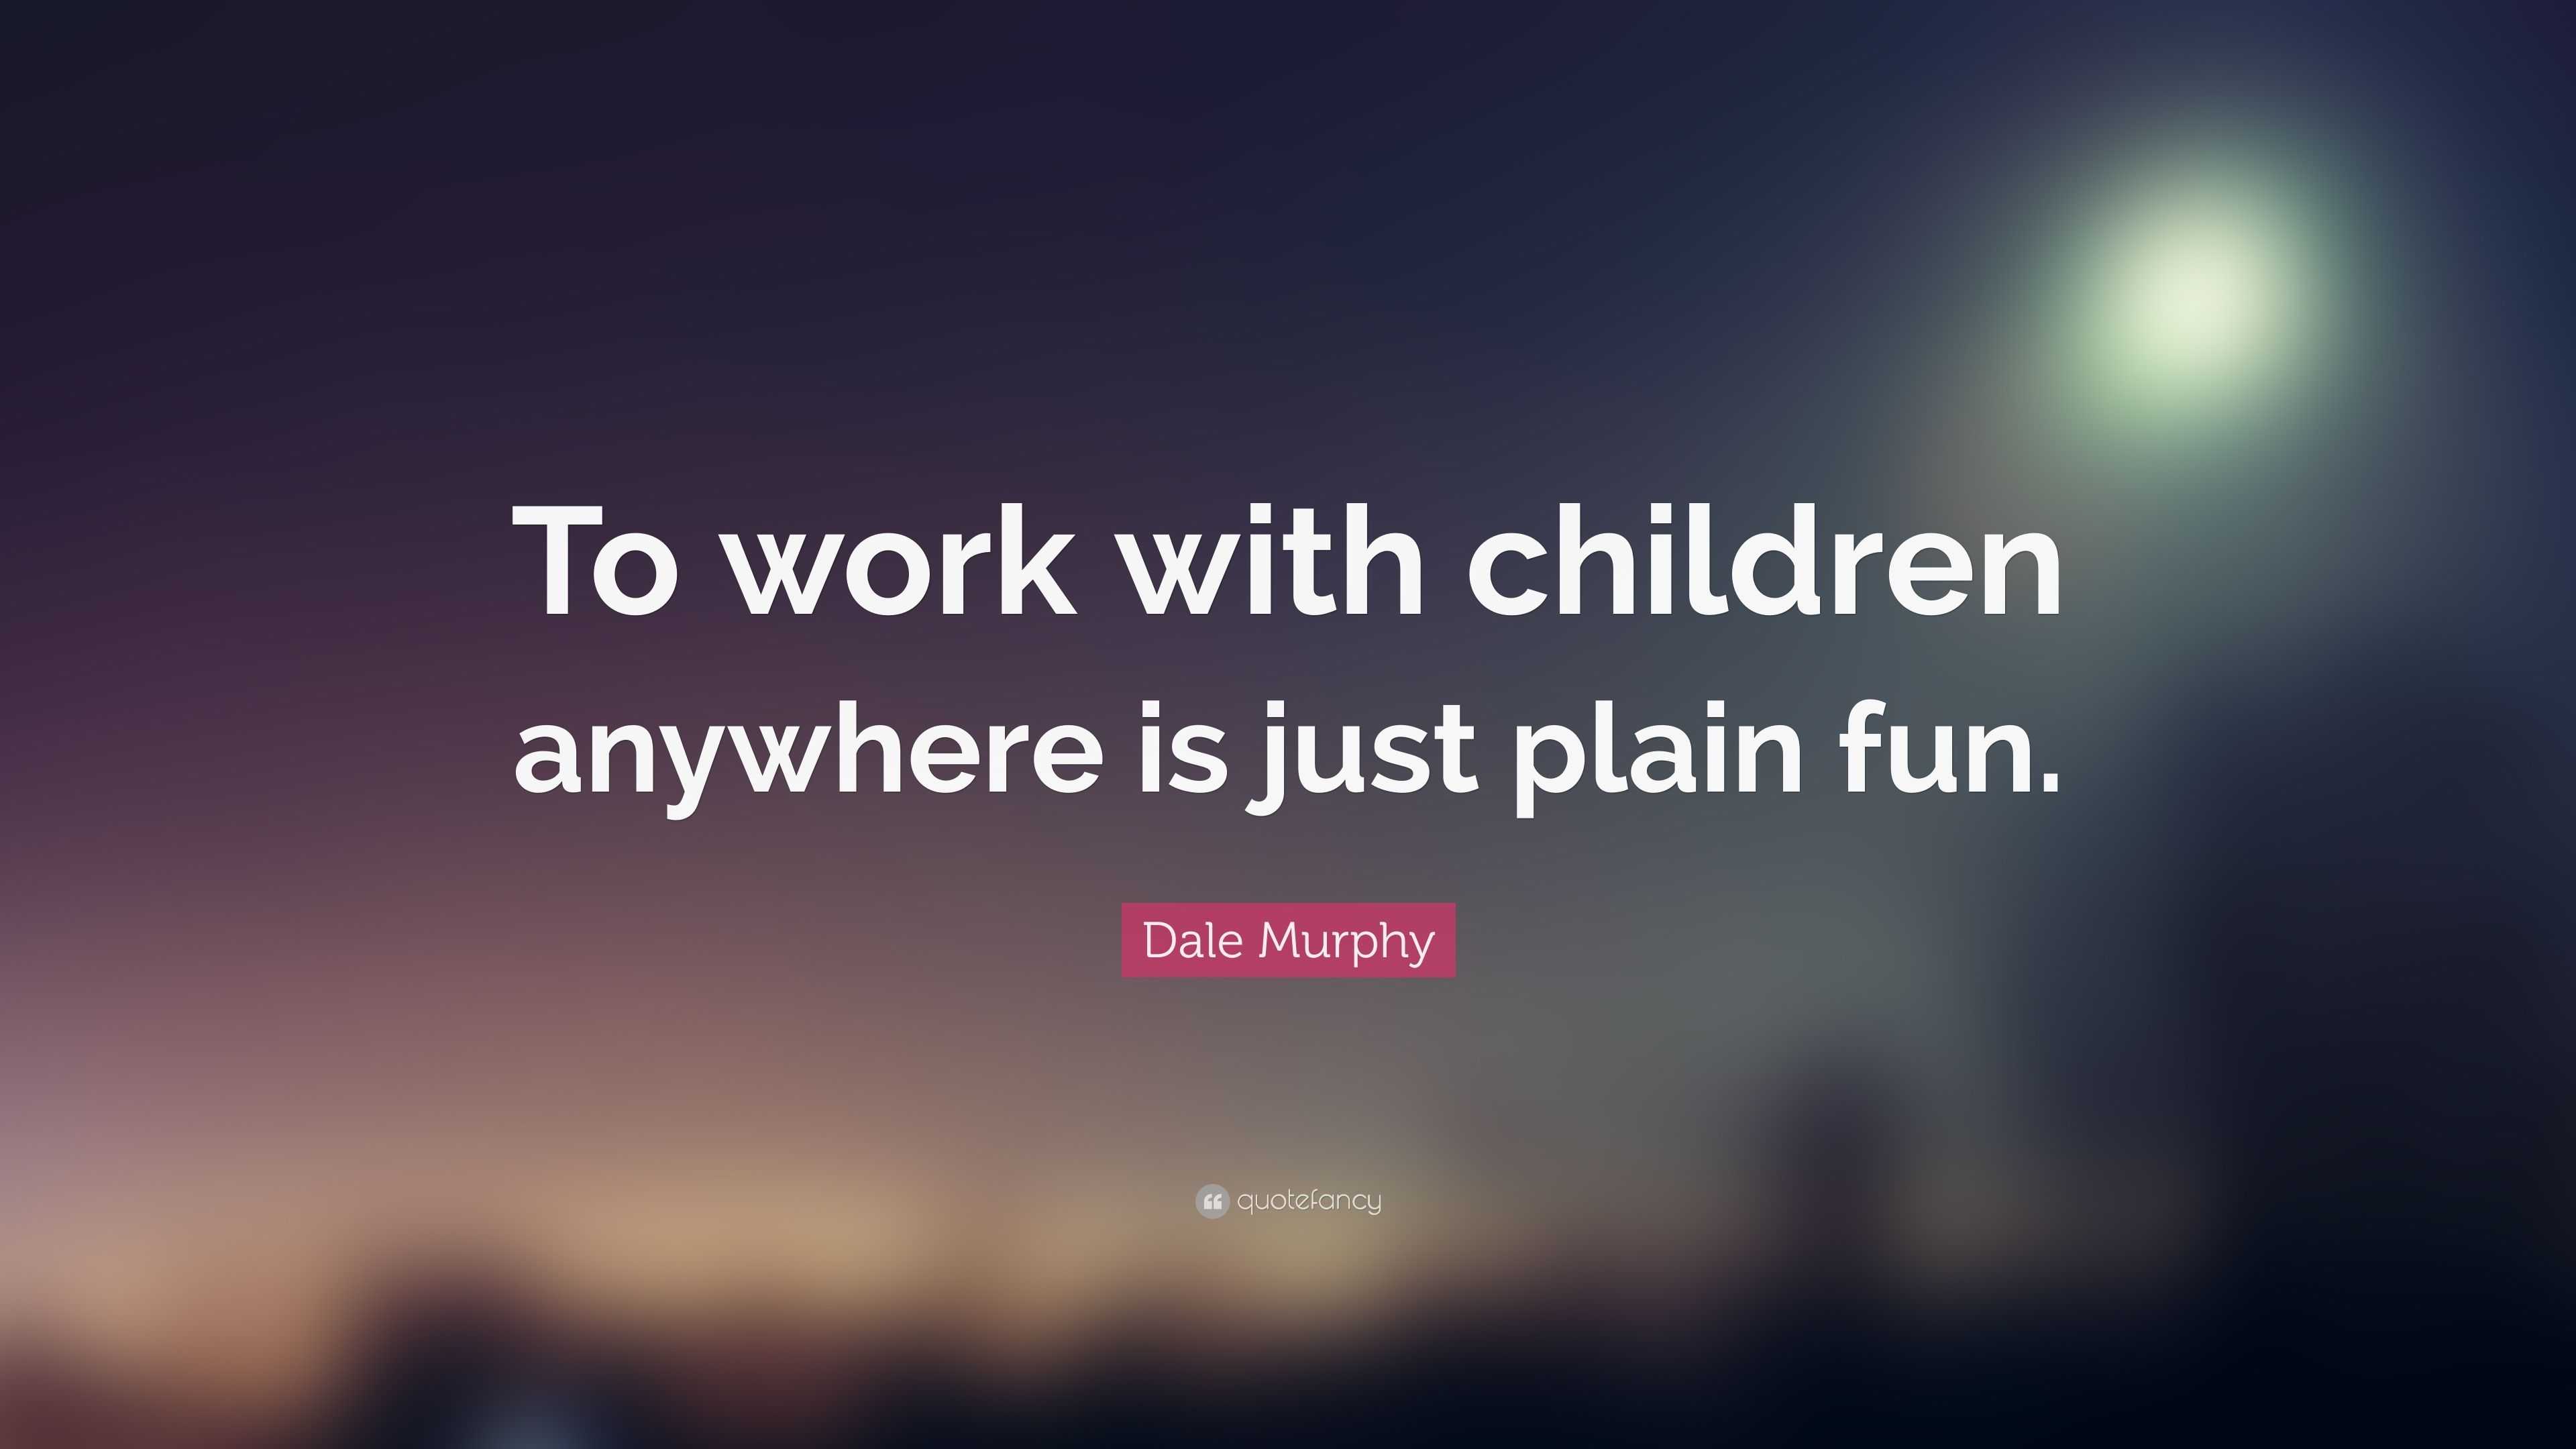 Dale Murphy Quote: “To work with children anywhere is just plain fun.”